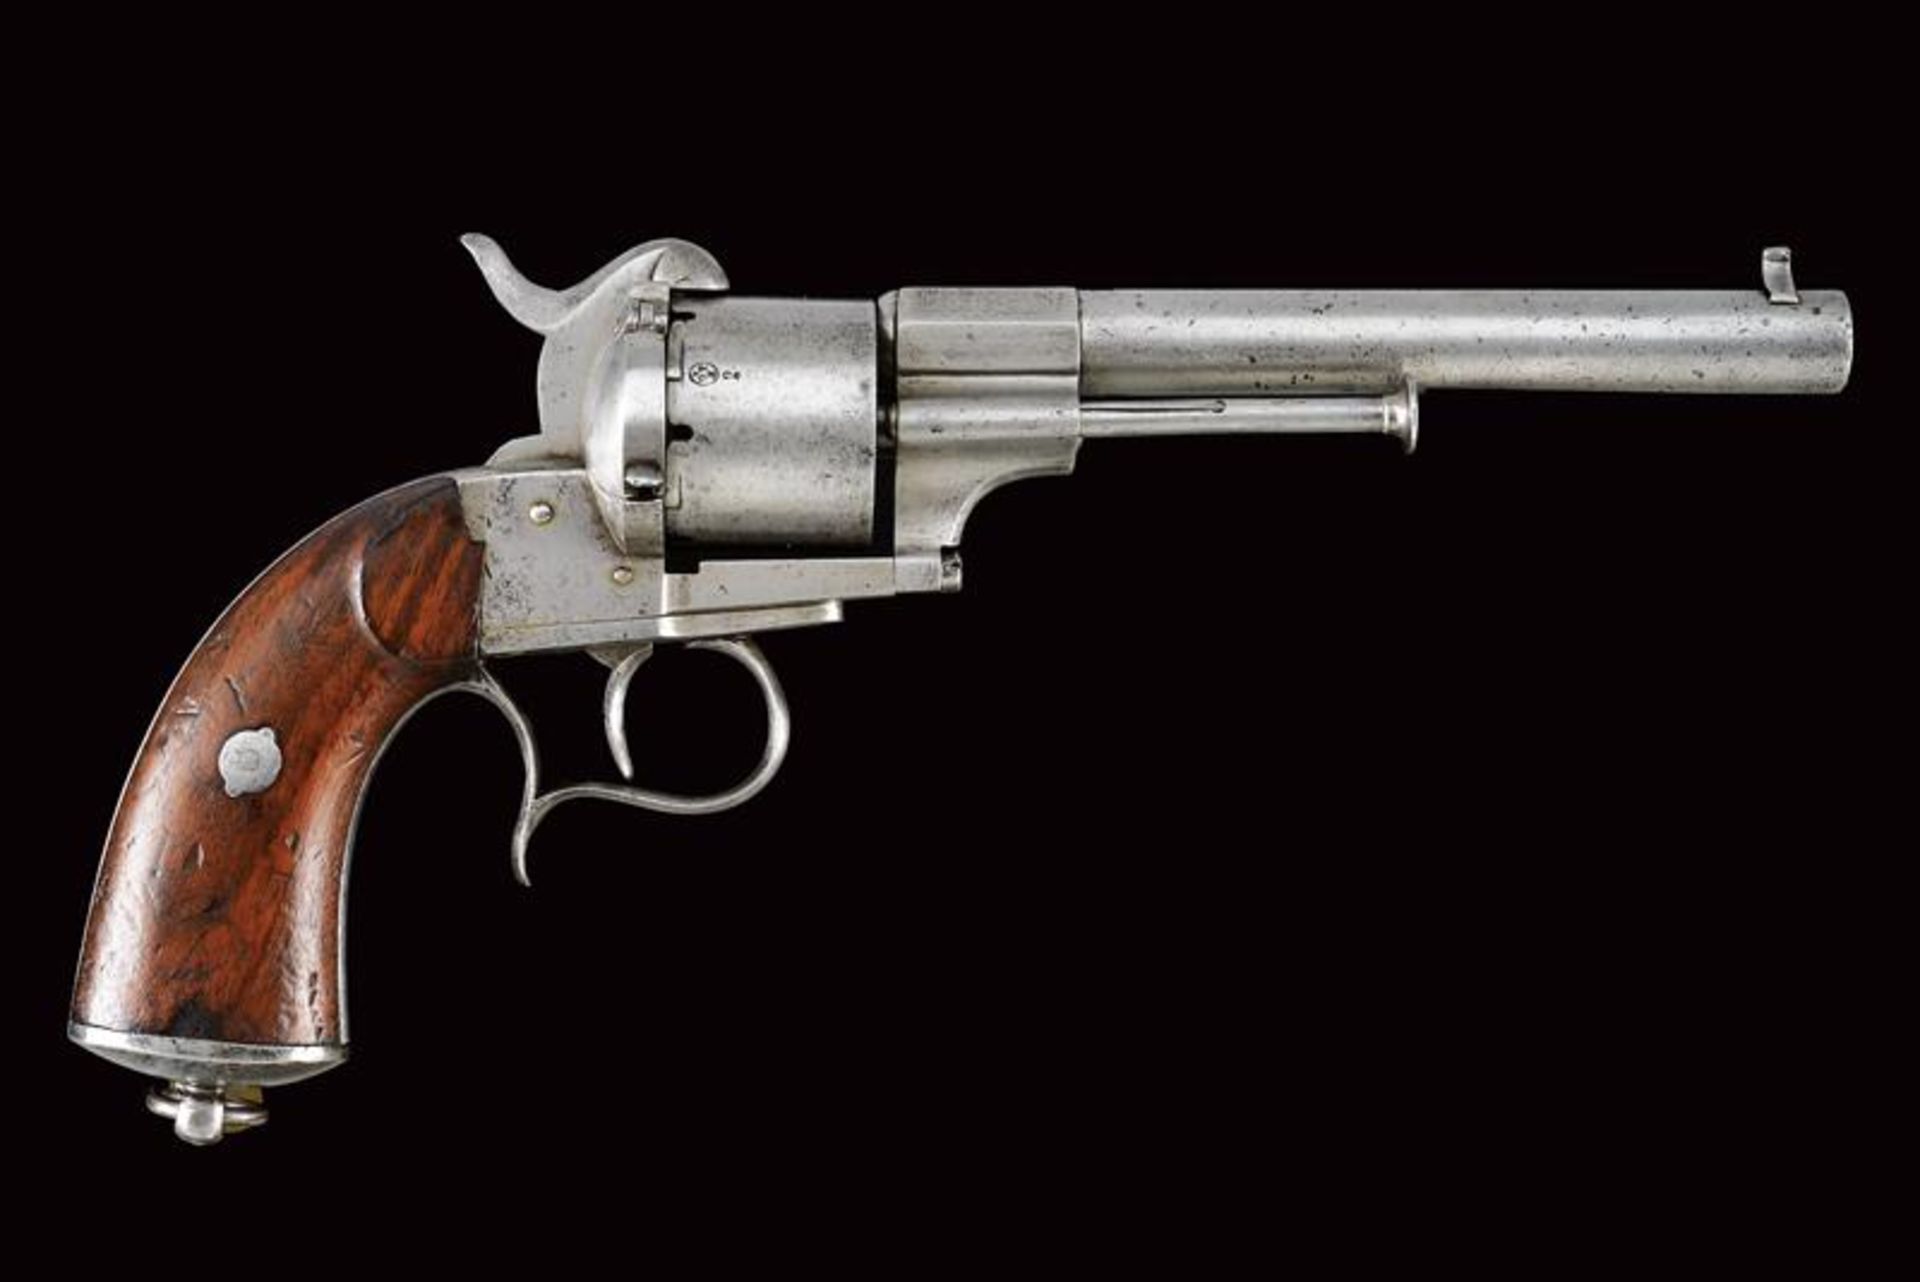 A Lefaucheux pin-fire revolver based on the 1858/1859 model